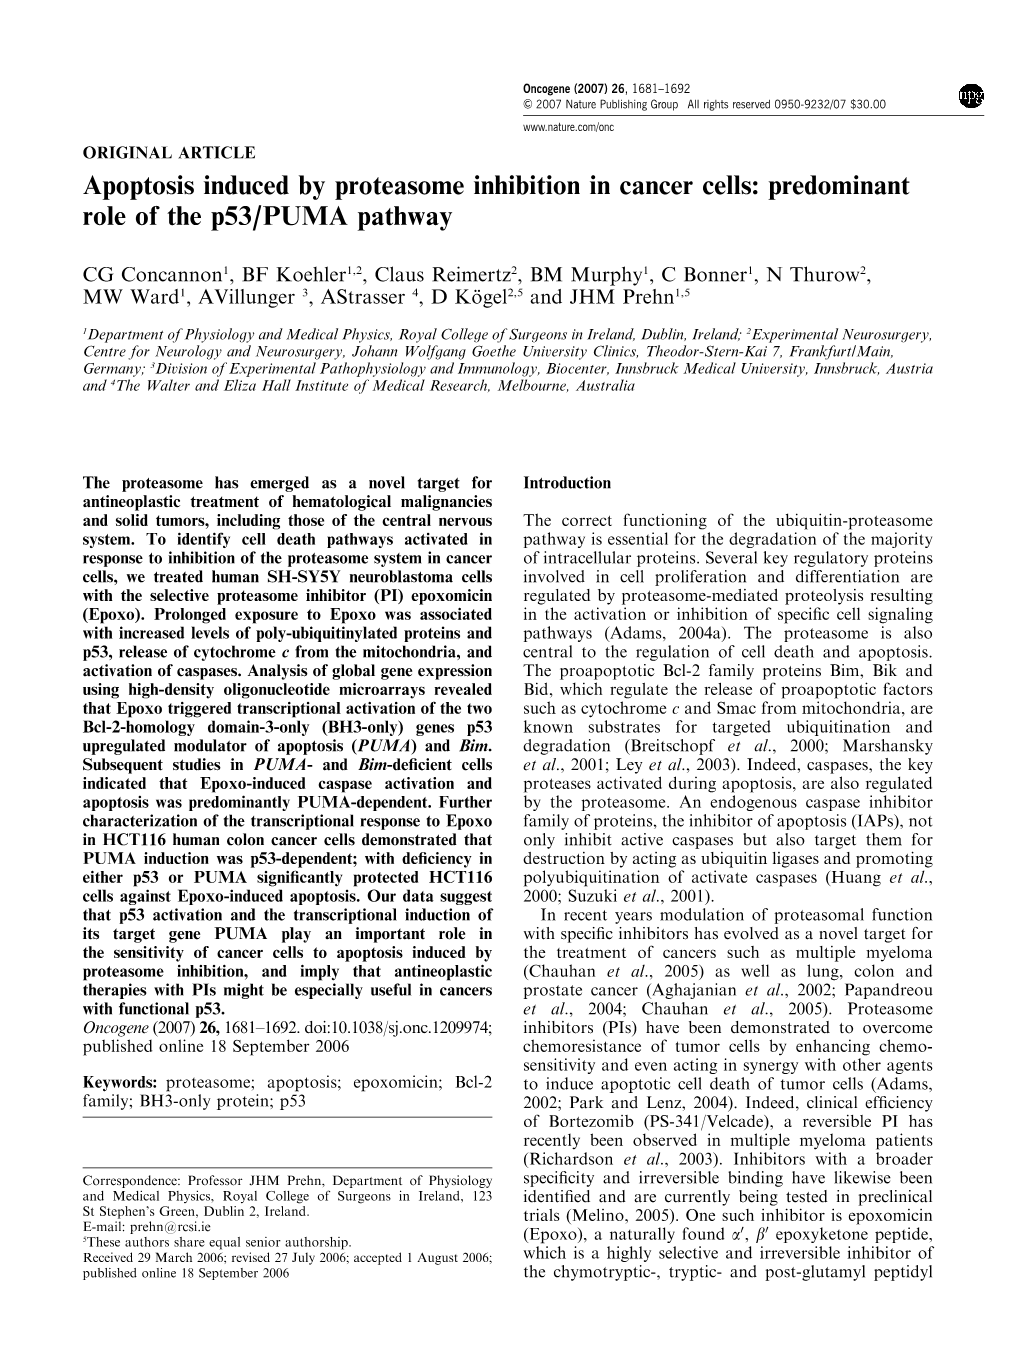 Apoptosis Induced by Proteasome Inhibition in Cancer Cells: Predominant Role of the P53/PUMA Pathway